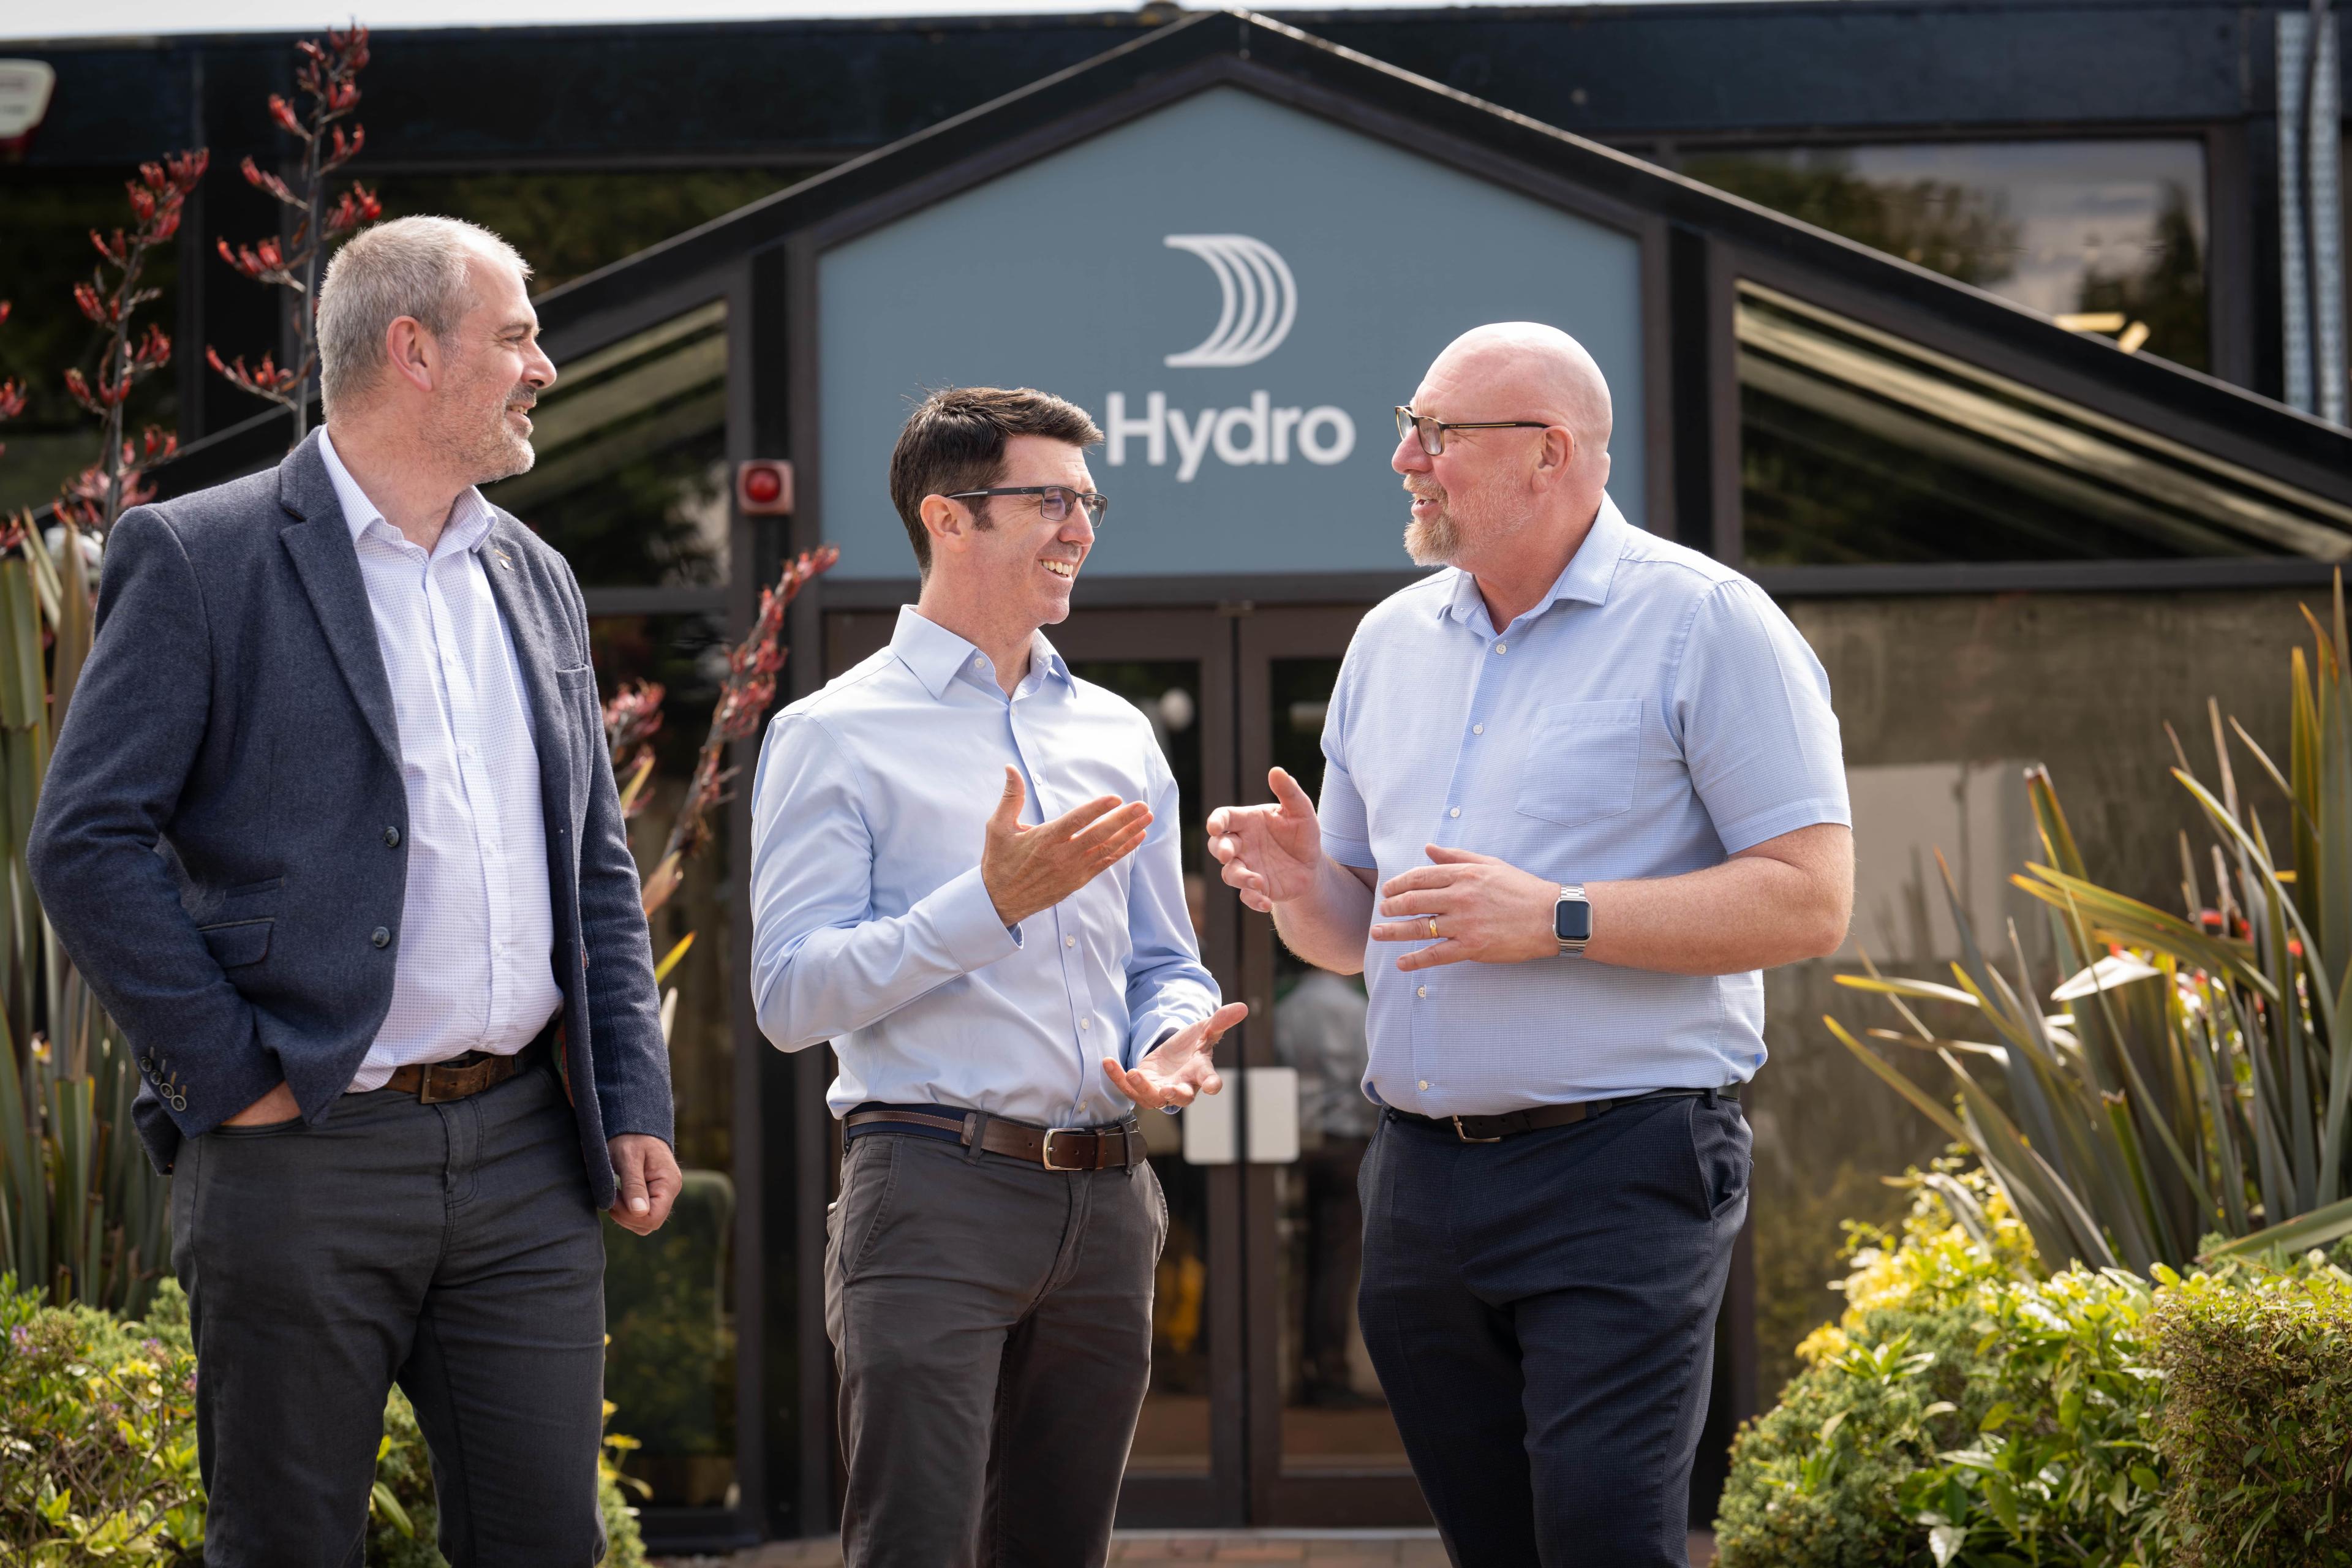 Roger Ablett, Country Managing Director, Hydro Extrusion UK; Greg Kavanagh, Head of Industrial & Commercial Sales; and Ian Bould, HSEQ and Sustainability Director, Hydro Extrusion UK, outside the Hydro Extrusions facility in Tibshelf